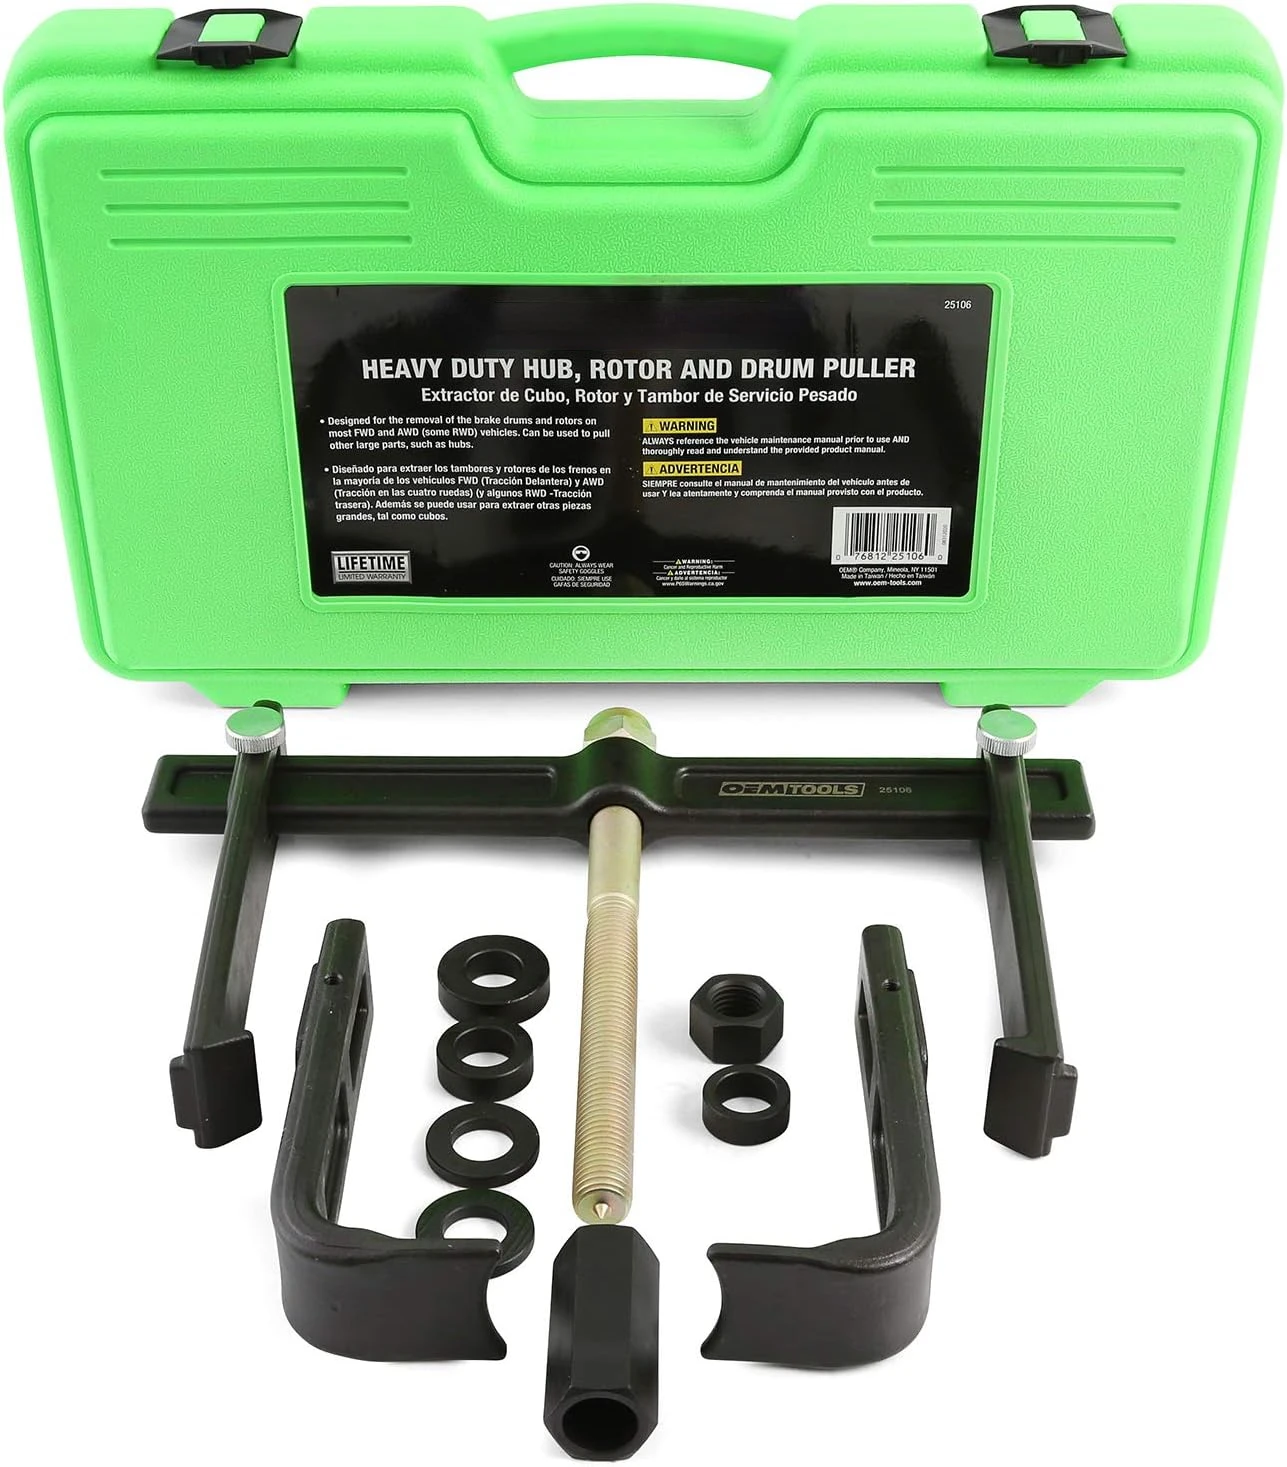 

Brake Drum And Rotor Puller, Wheel Hub , Use with IMPACT Wrench, Adaptors For Use With Most Common Hub Sizes, Brake Drum